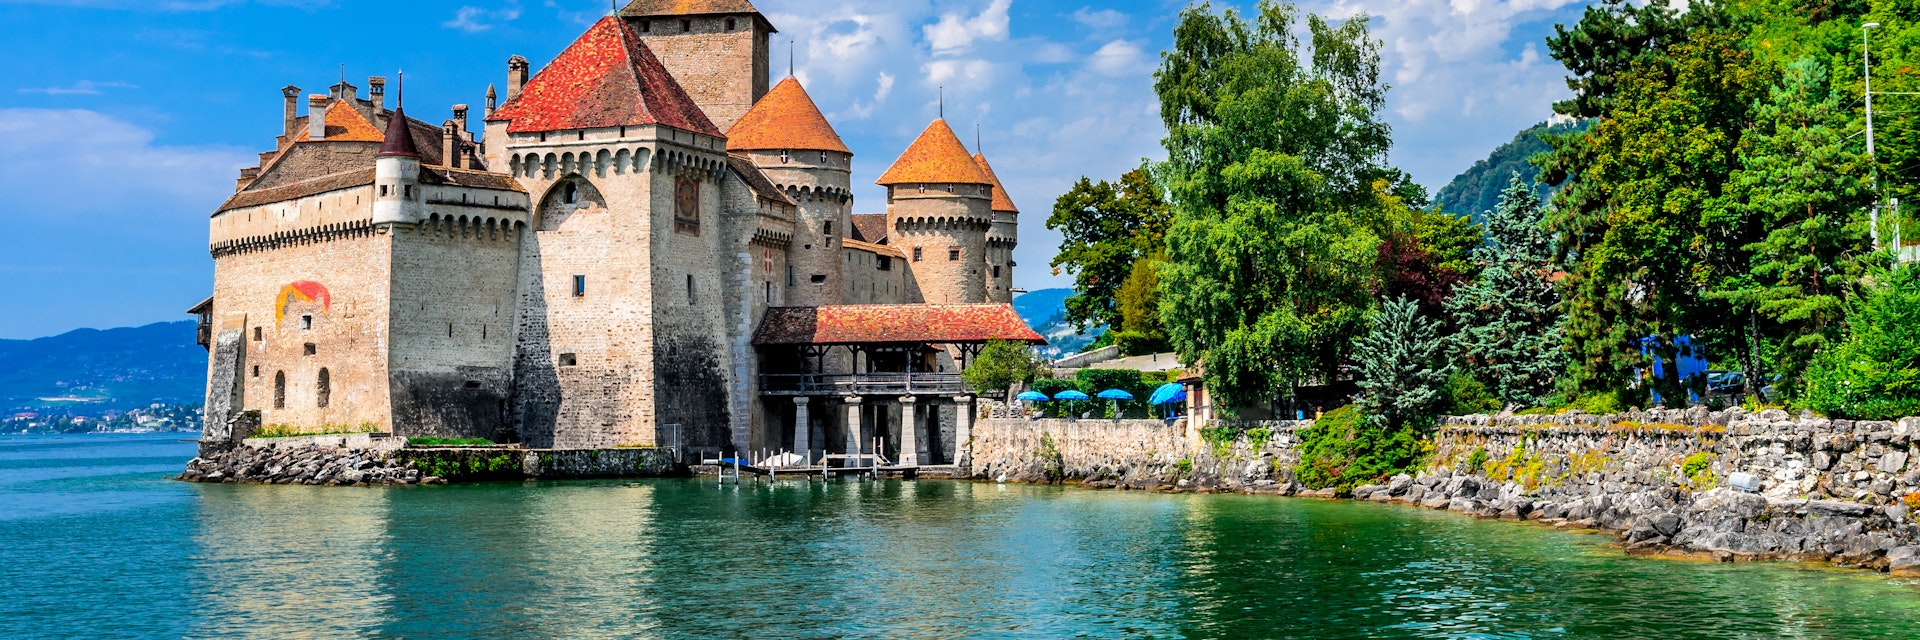 AUGUST 18, 2011: Exterior of Castle Chillon, one of the most visited castles in Switzerland.